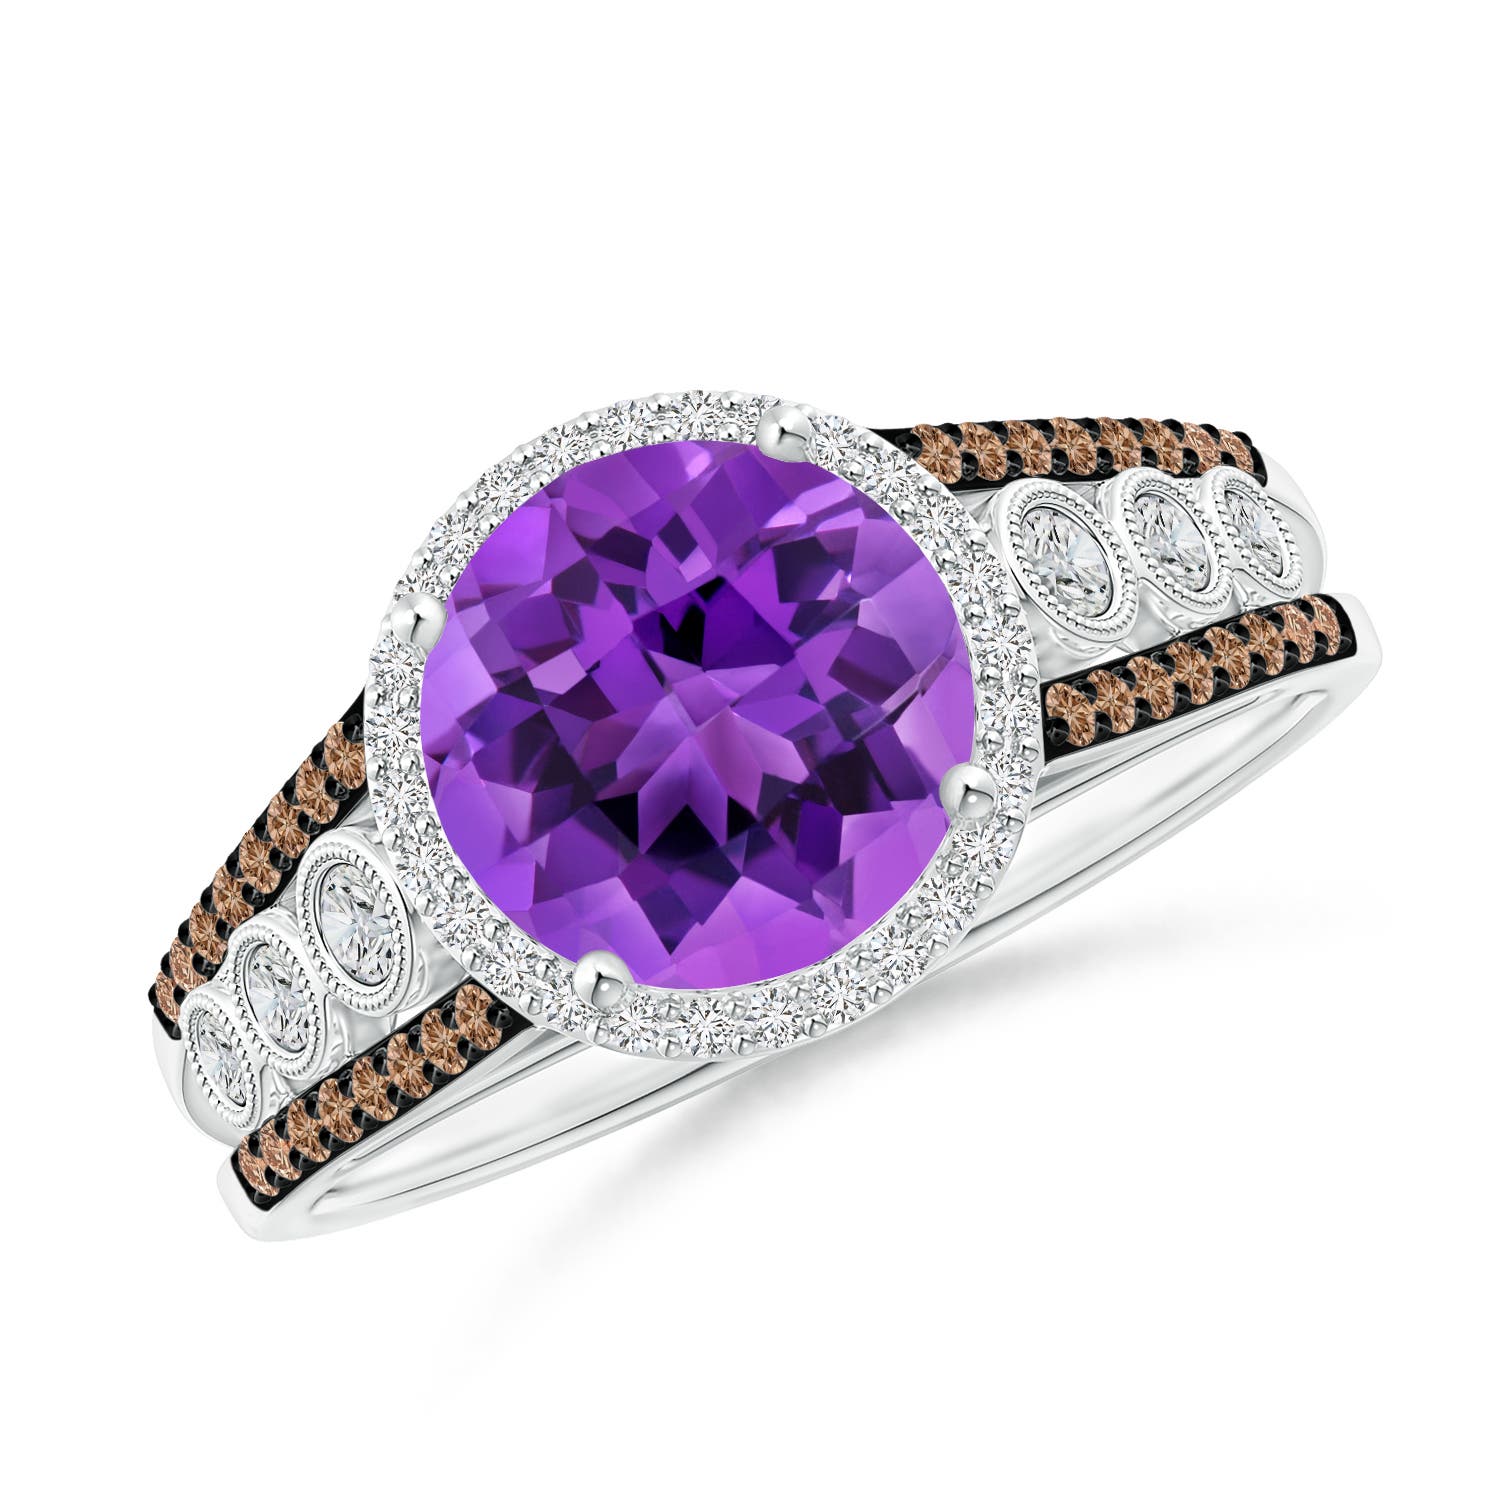 AAA - Amethyst / 2.11 CT / 14 KT White Gold